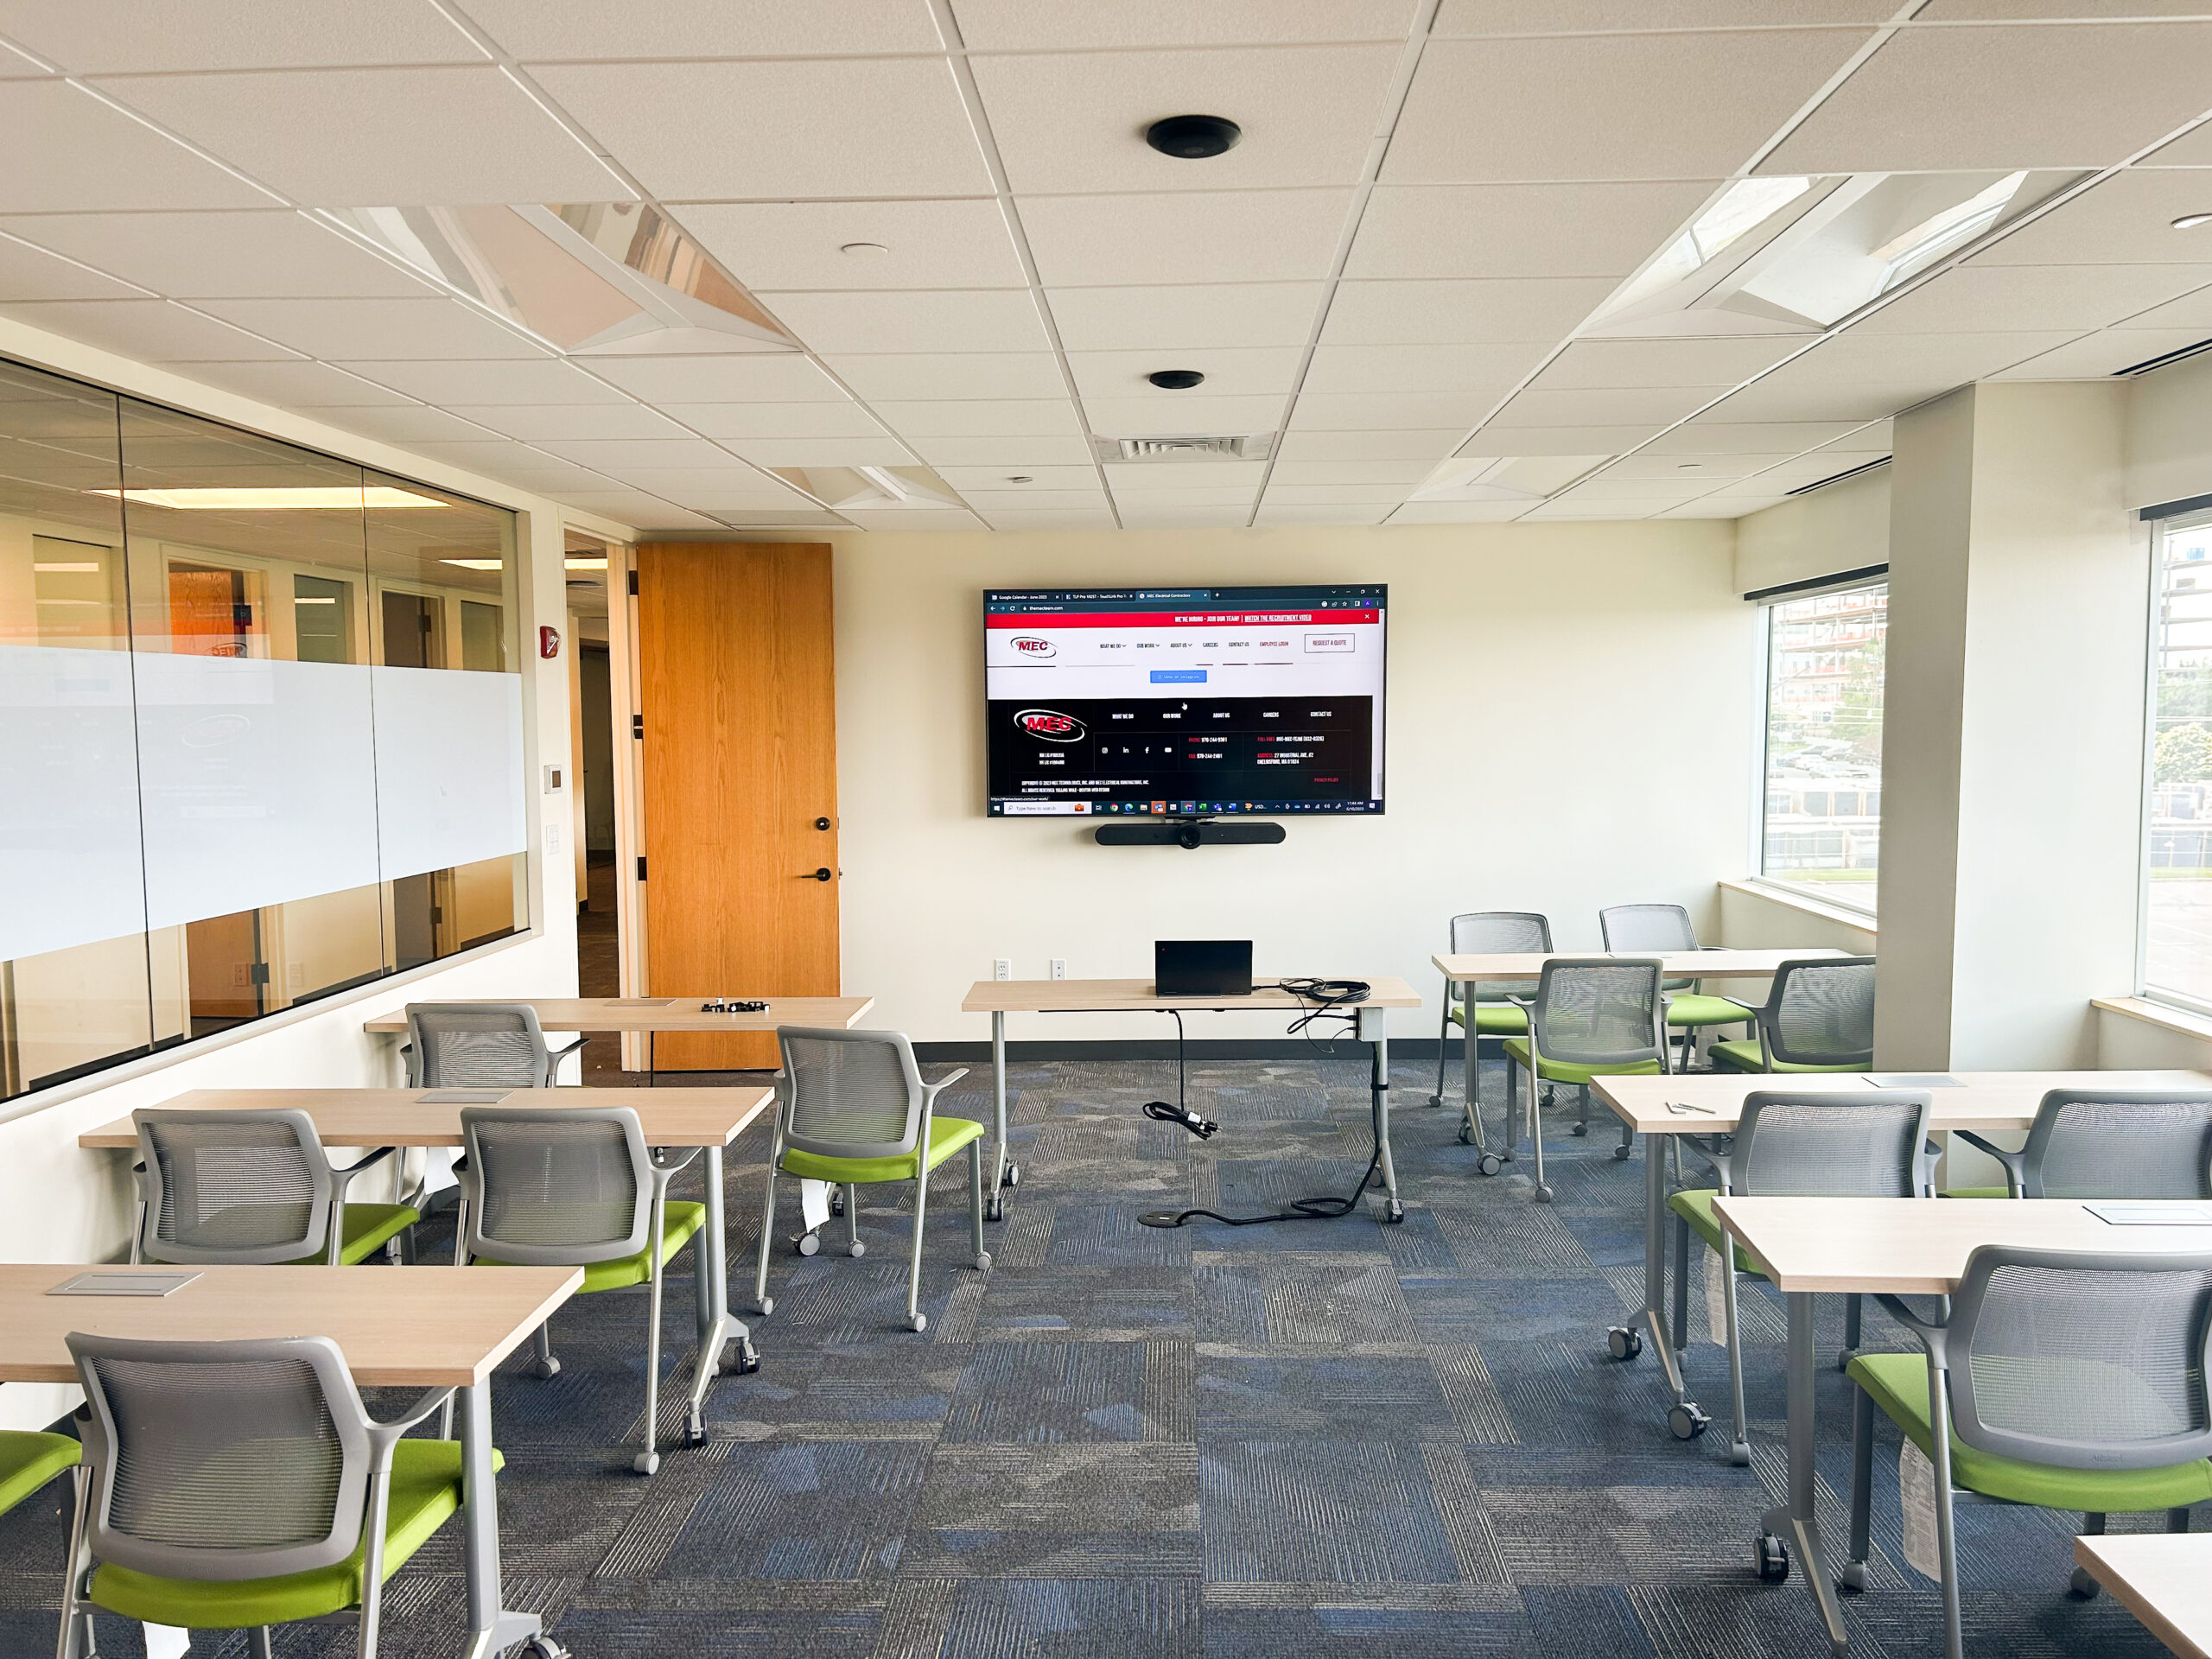 Audio Visual job in training room completed by MEC Technologies